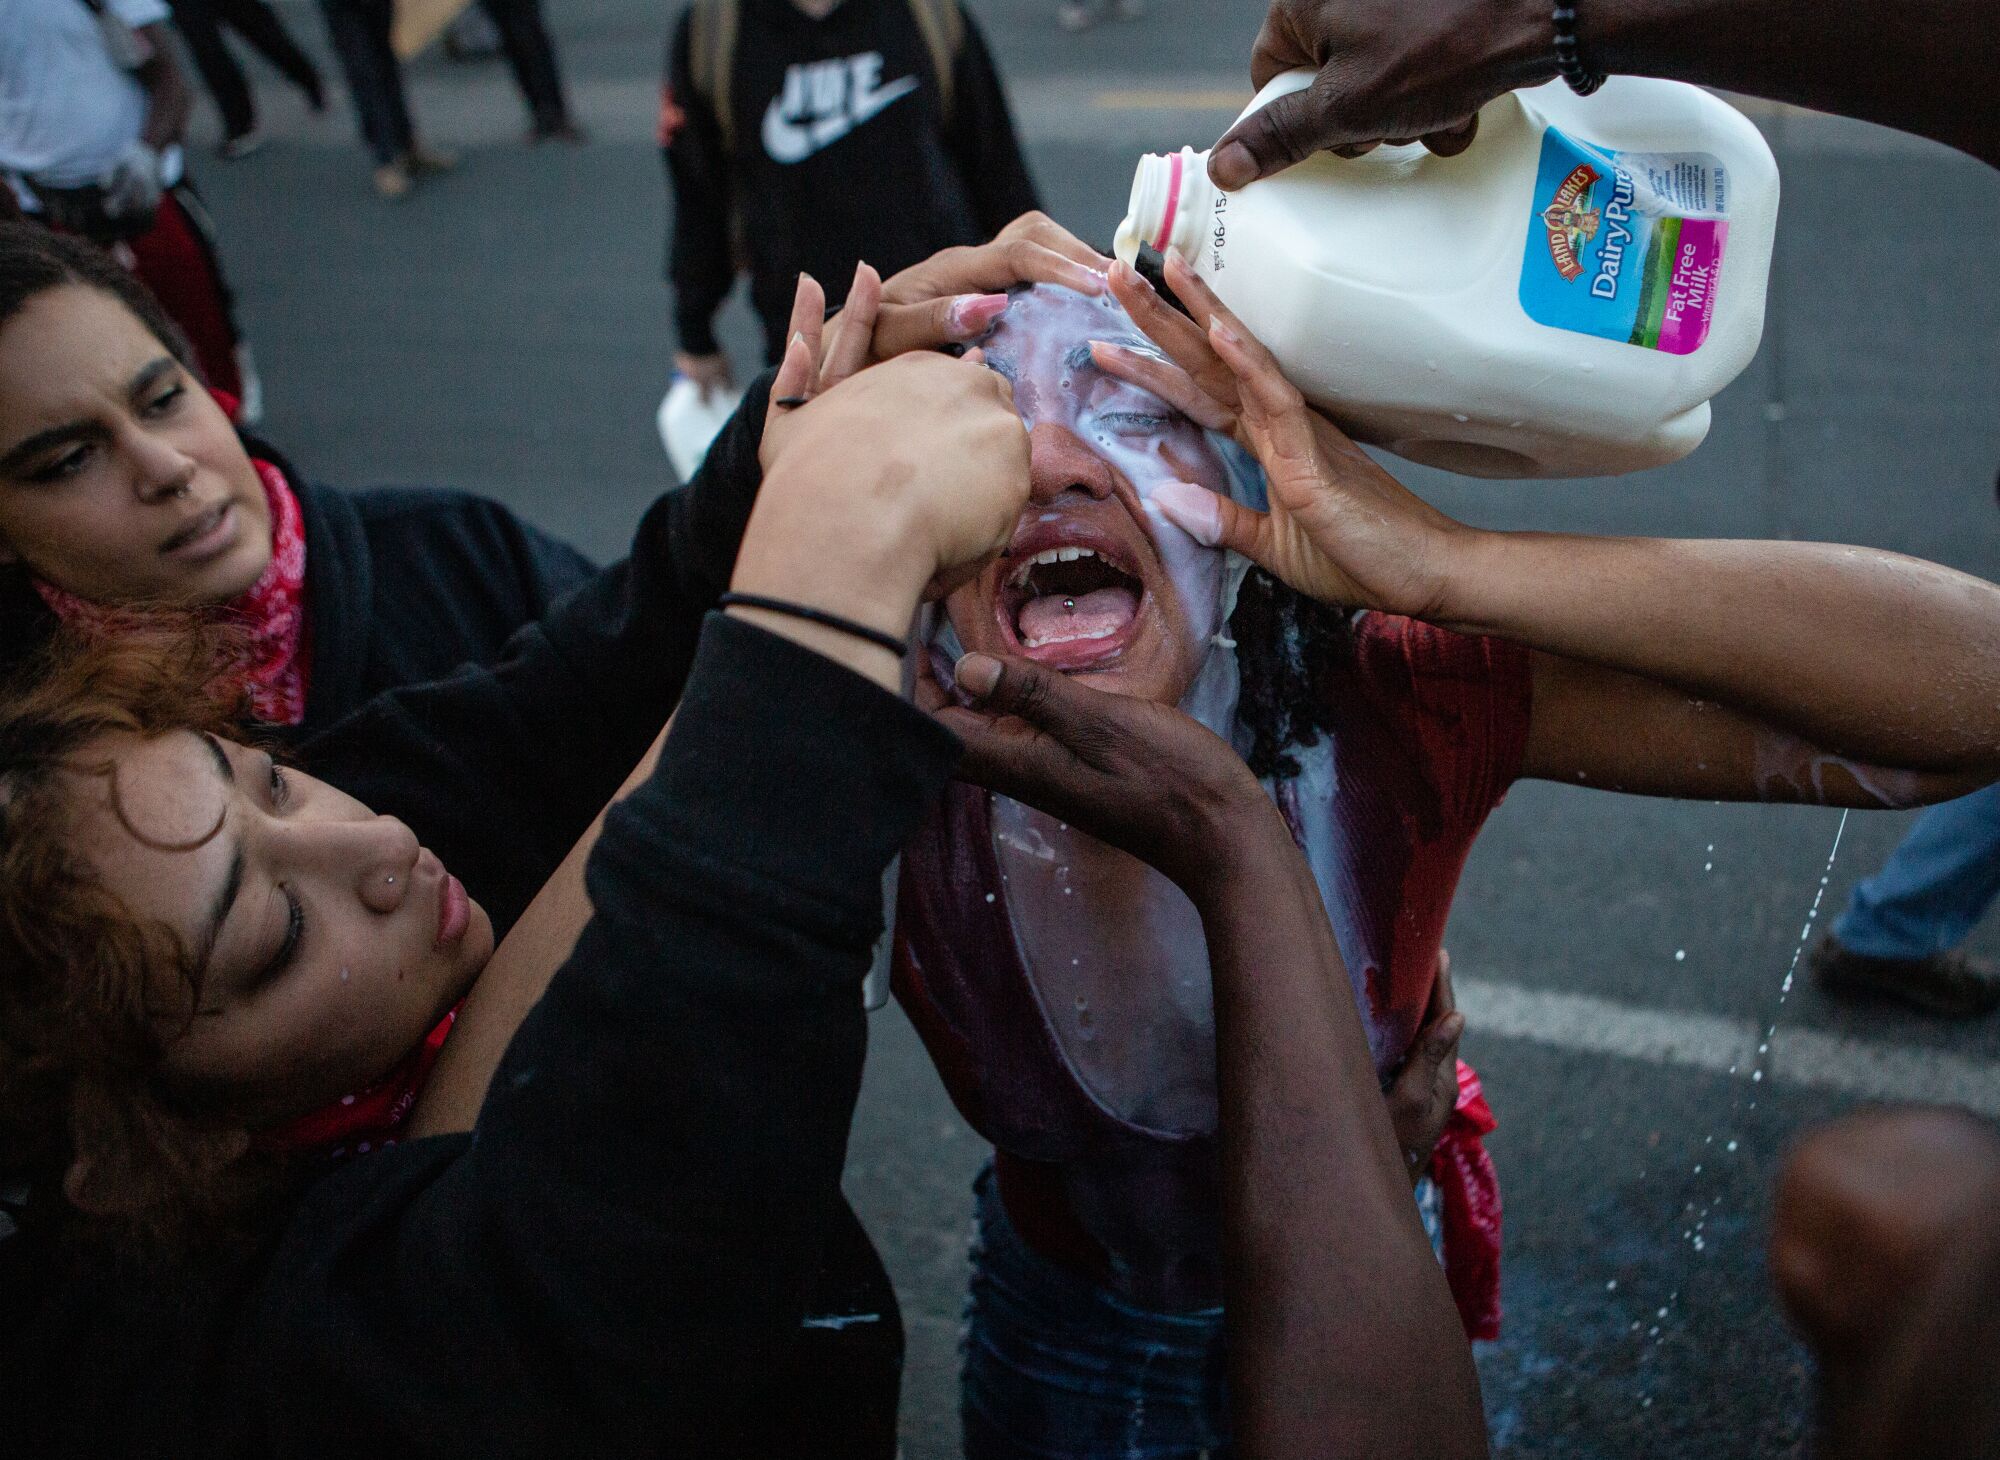 A protester has her eyes washed after being pepper-sprayed.